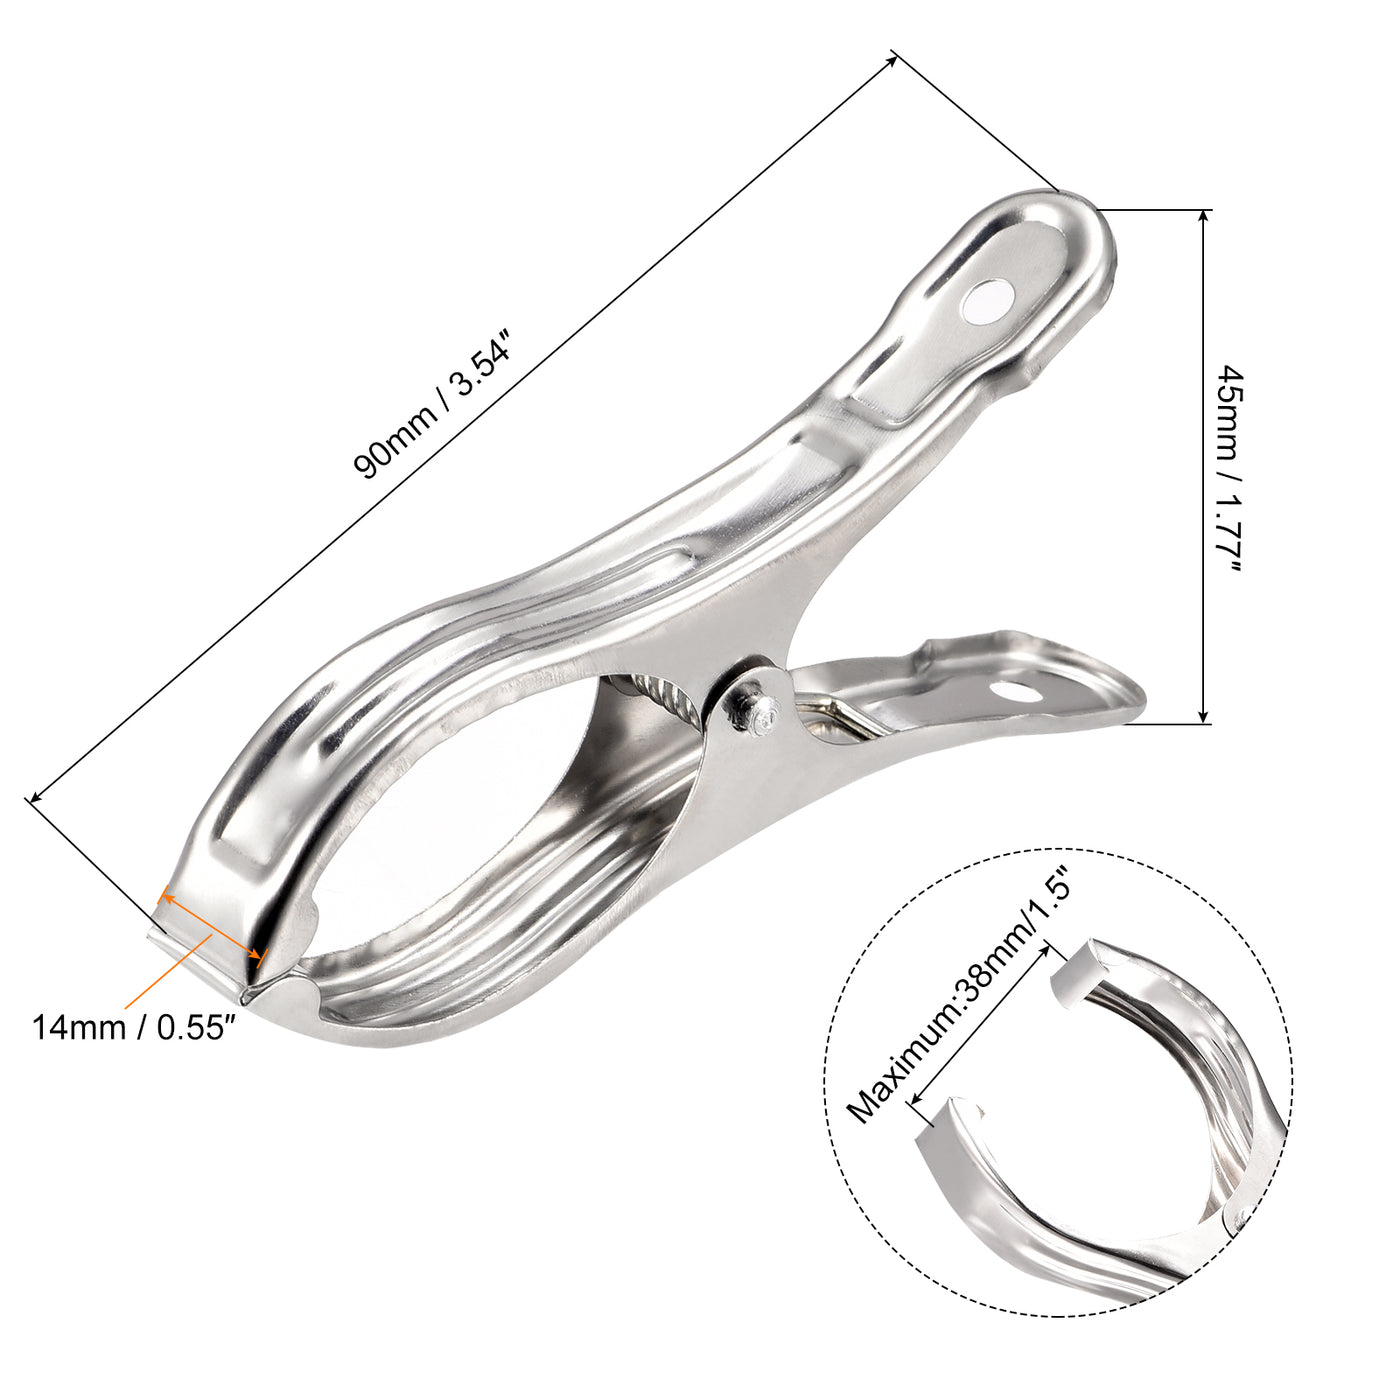 uxcell Uxcell Tablecloth Clips - 90mm Stainless Steel Clamps for Fixing Table Cloth Hanging Clothes, 12 Pcs